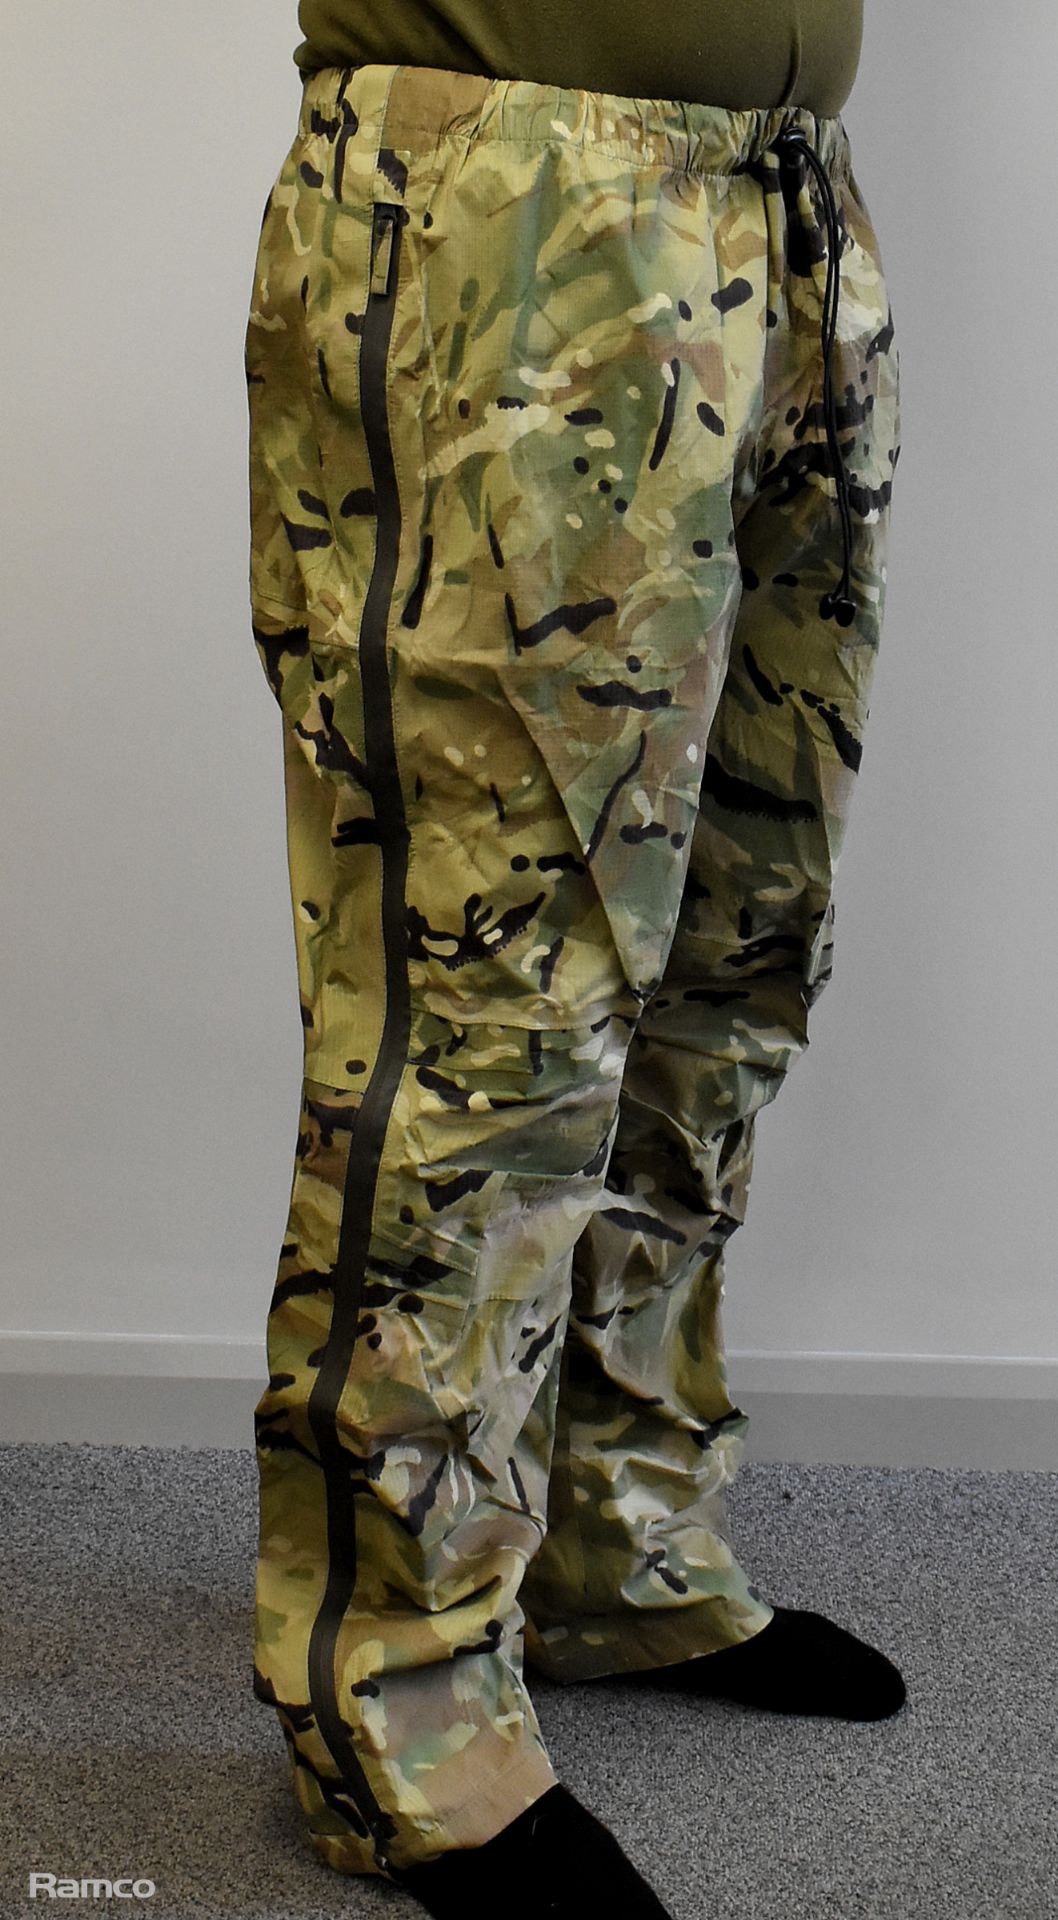 30x British Army MTP waterproof light weight trousers - mixed grades and sizes - Image 4 of 10